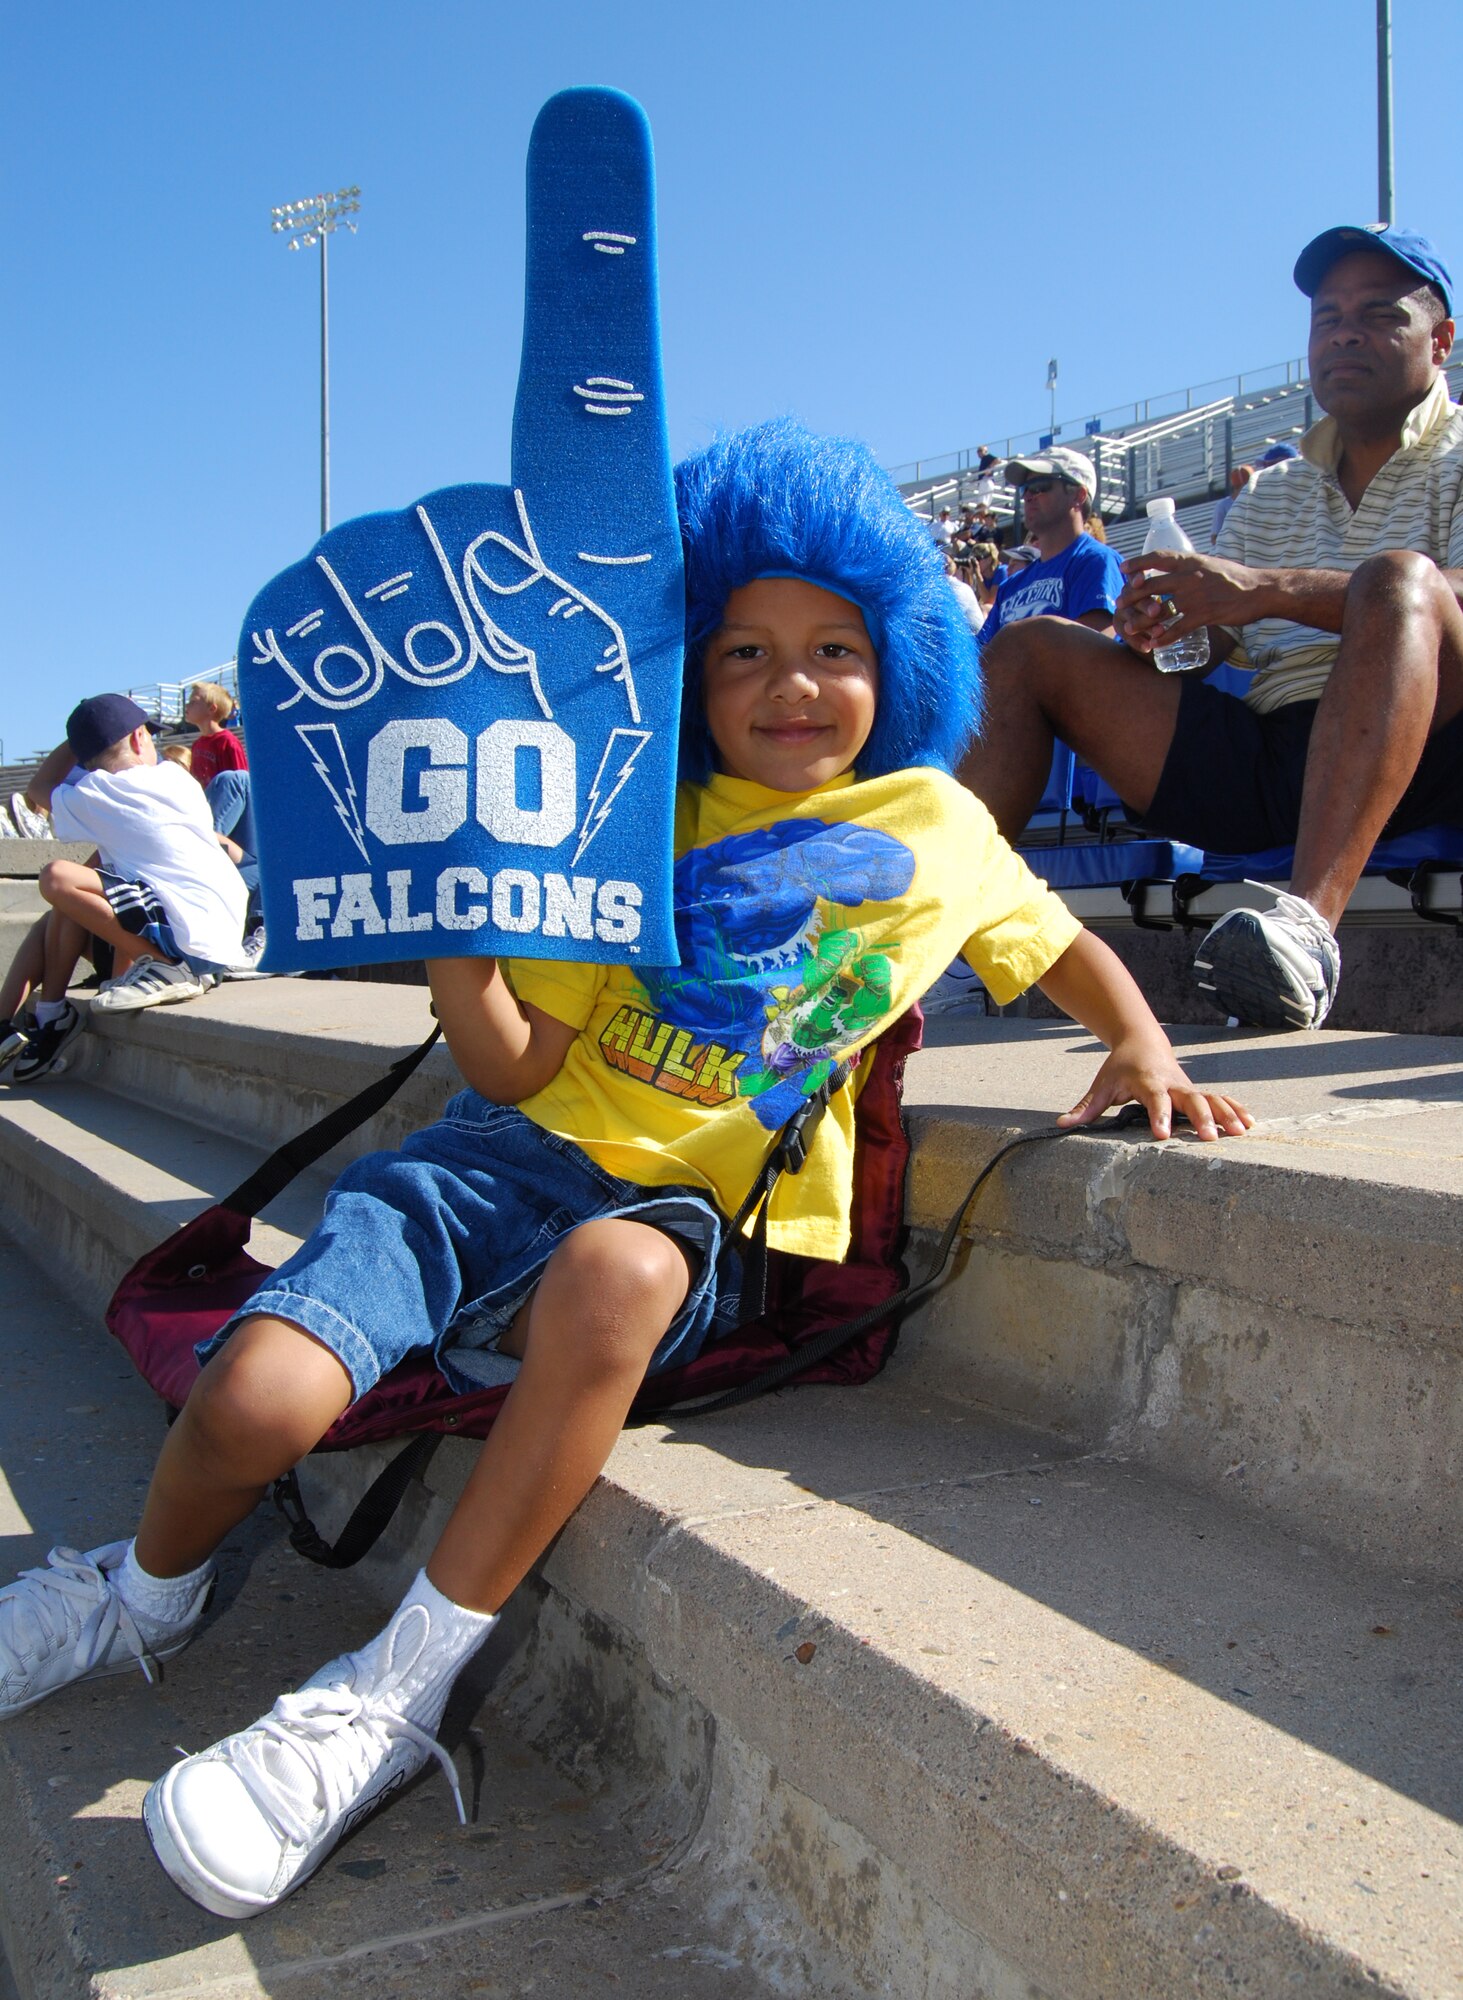 Jonathan Terrence Durant, age 5, poses for a photo in Falcon Stadium at the U.S. Air Force Academy, Colo., Aug. 22, 2009. Jonathan and about 1,000 other fans, large and small, attended a Falcons scrimmage at the stadium and stayed afterward to meet the 2009 football team. Jonathan's father, Col. James Durant (right), is deputy department head for the Department of Law. (U.S. Air Force photo/Staff Sgt. Don Branum)